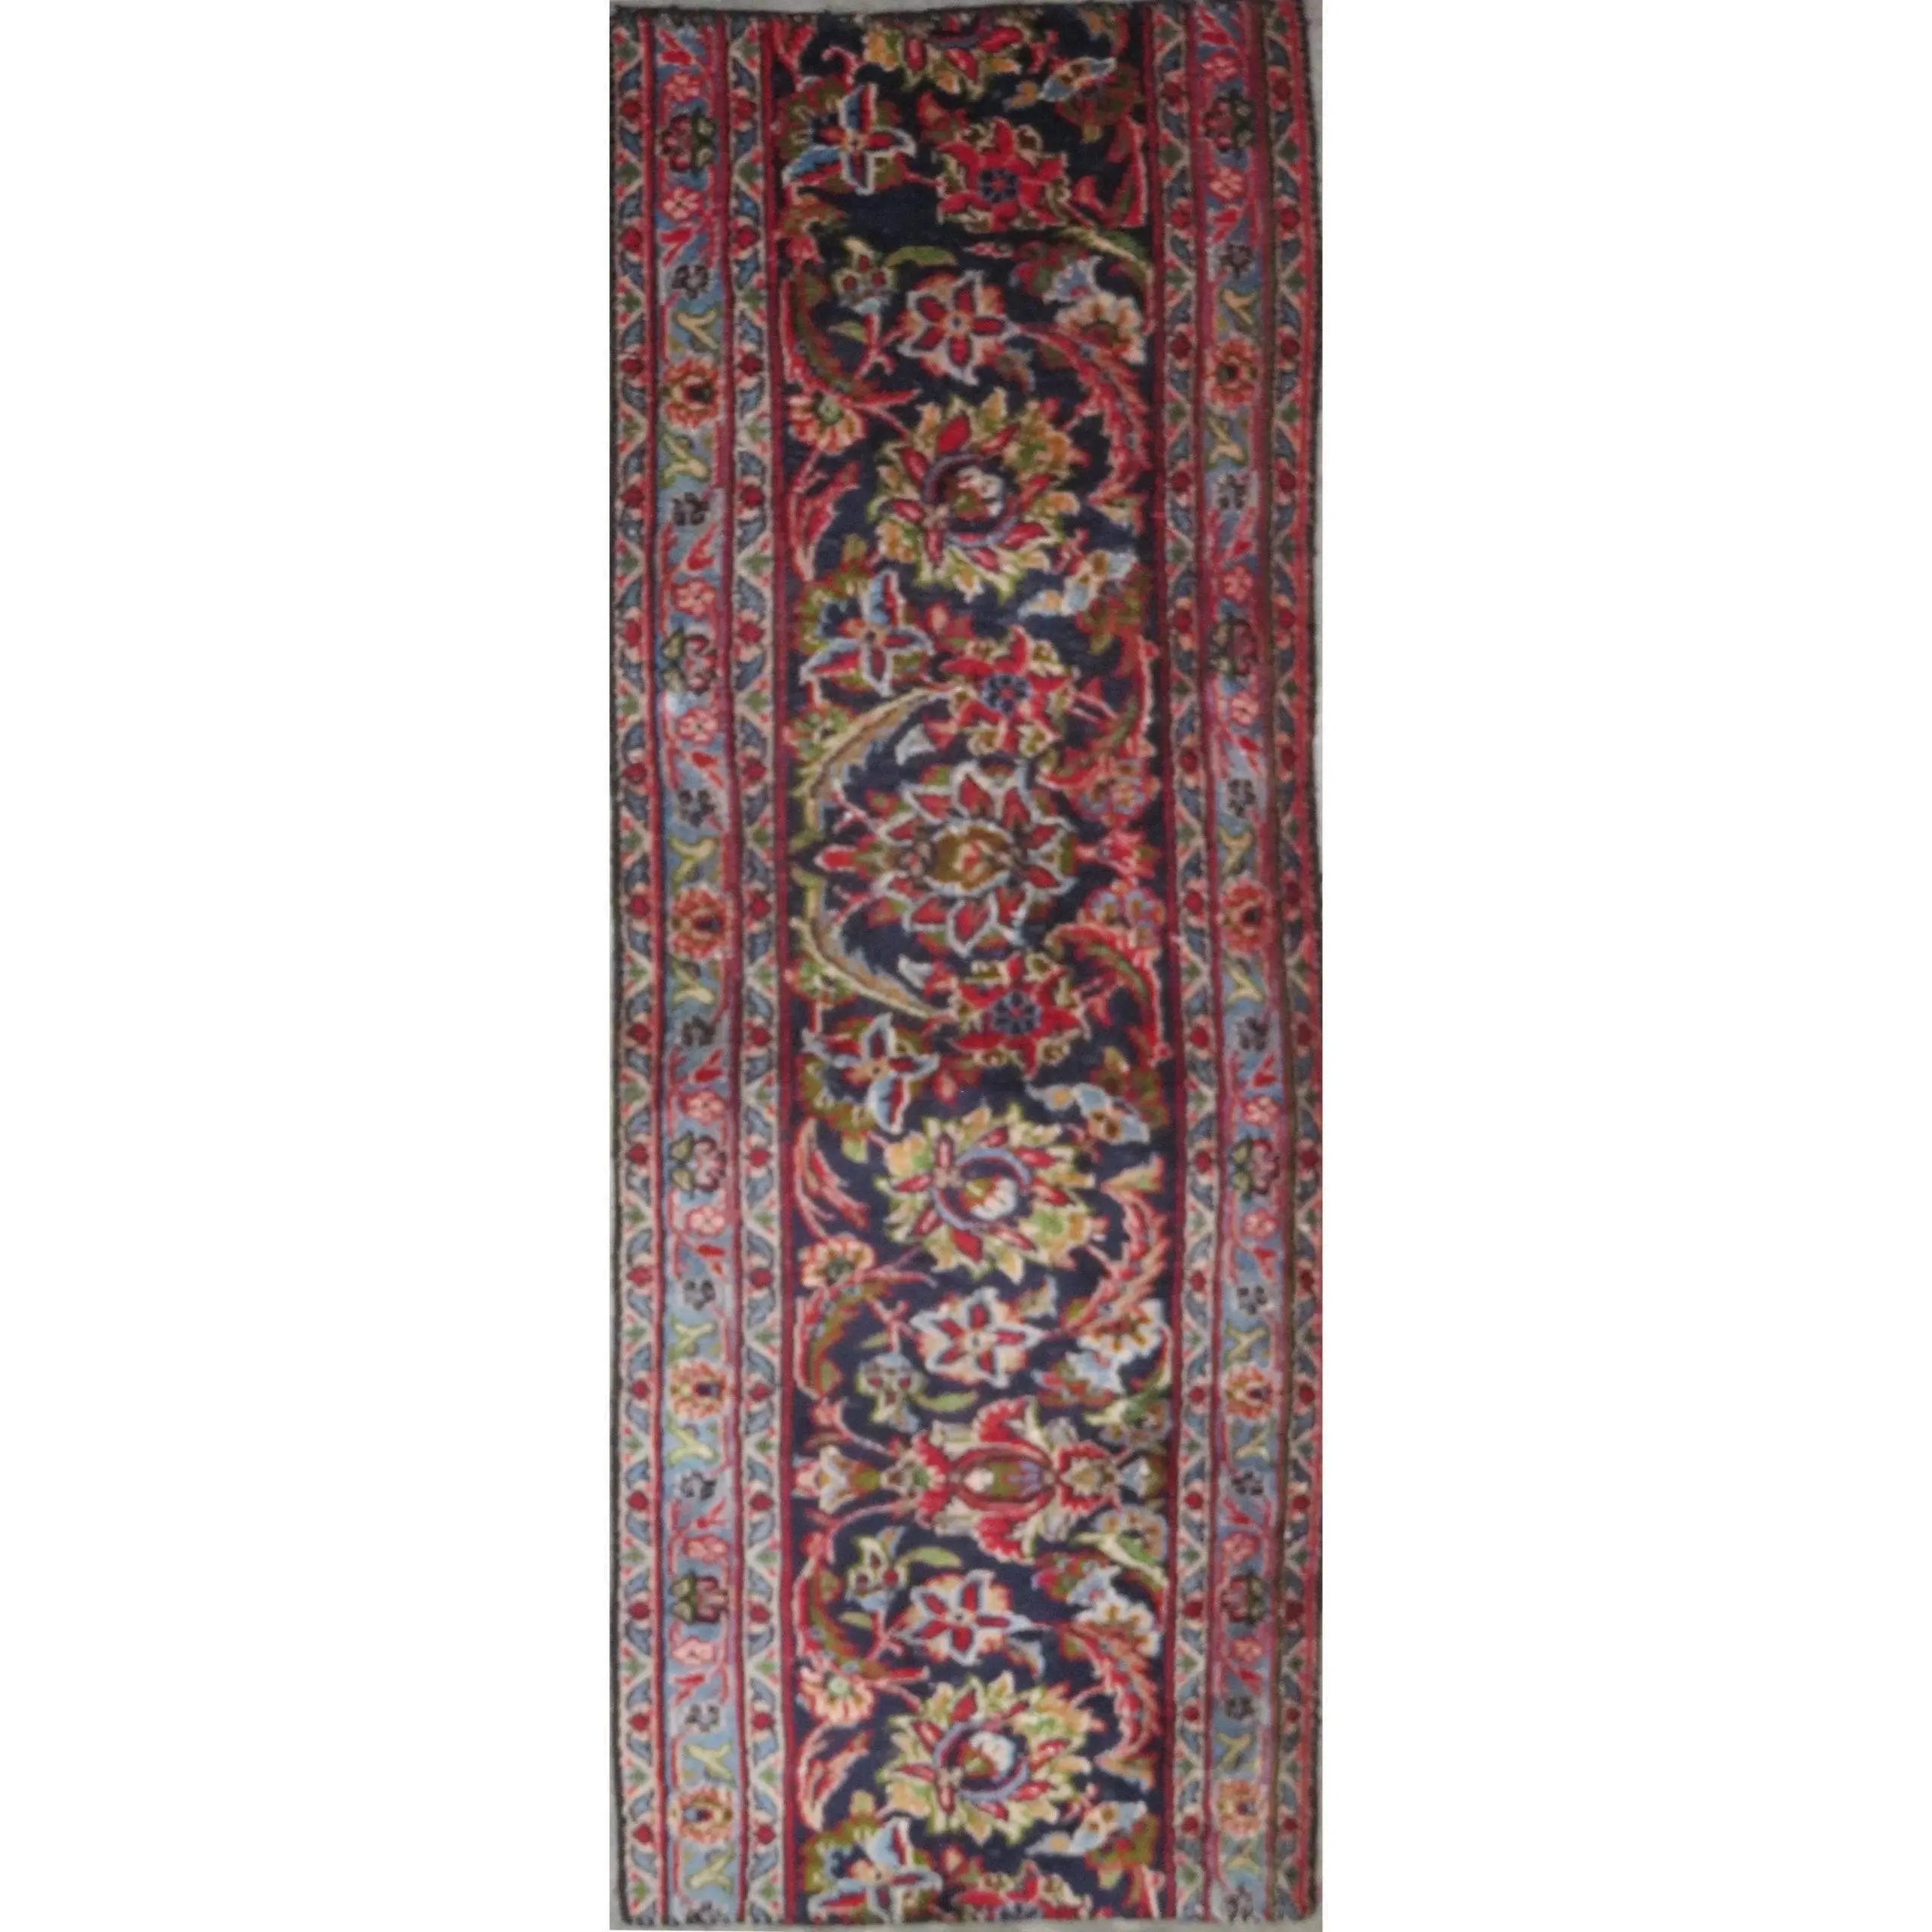 Hand-Knotted Persian Wool Rug _ Luxurious Vintage Design, 4'0" x 1'0", Artisan Crafted